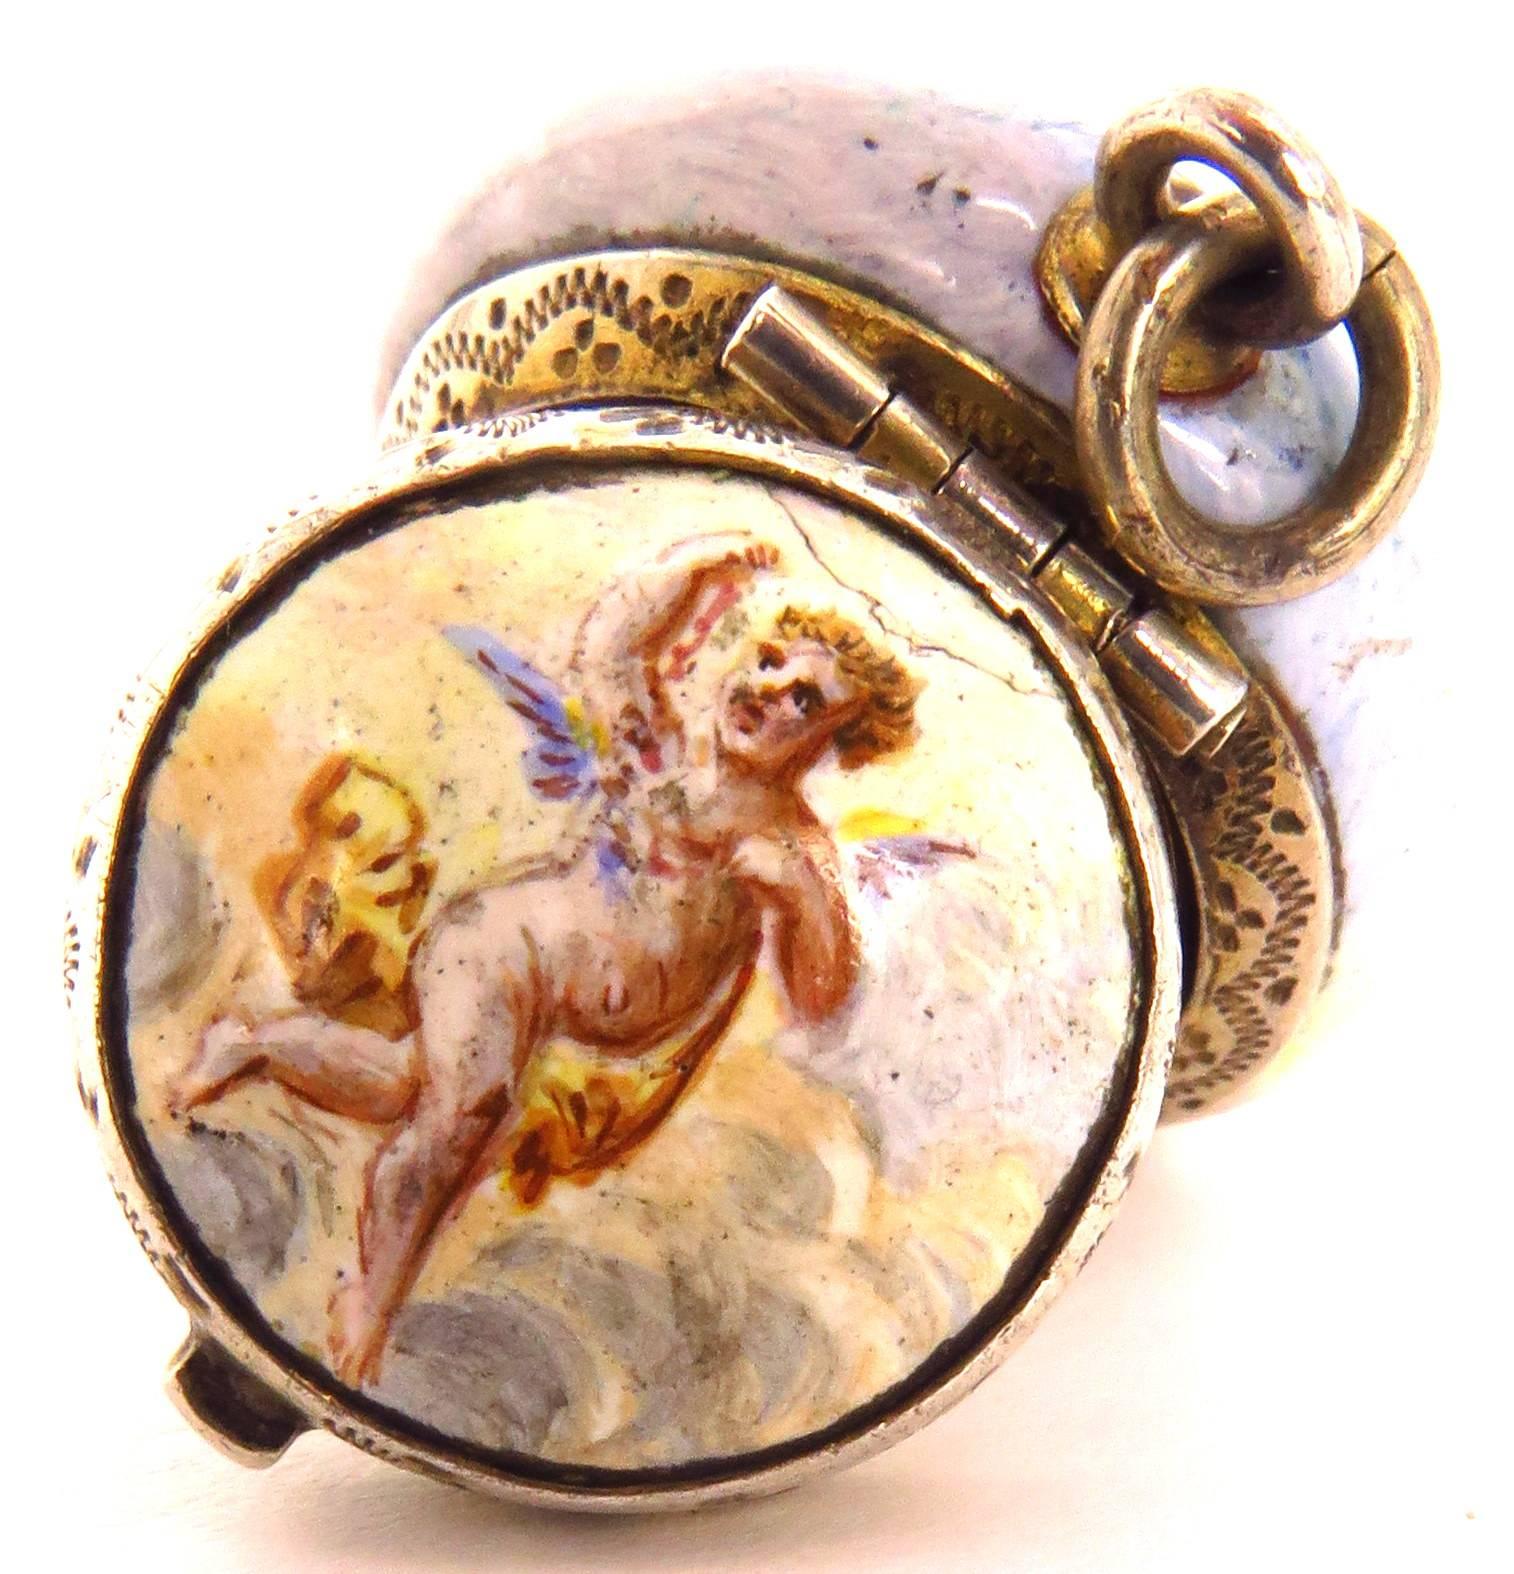 This wonderful porcelain vinaigrette has such a flow to it!. It's shaped like a miniature powder jar. The cover portrays a dog running with an angel. The bottom portrays 2 angels, one holding a lyre. When opened, the inside cover depicts a rose. The